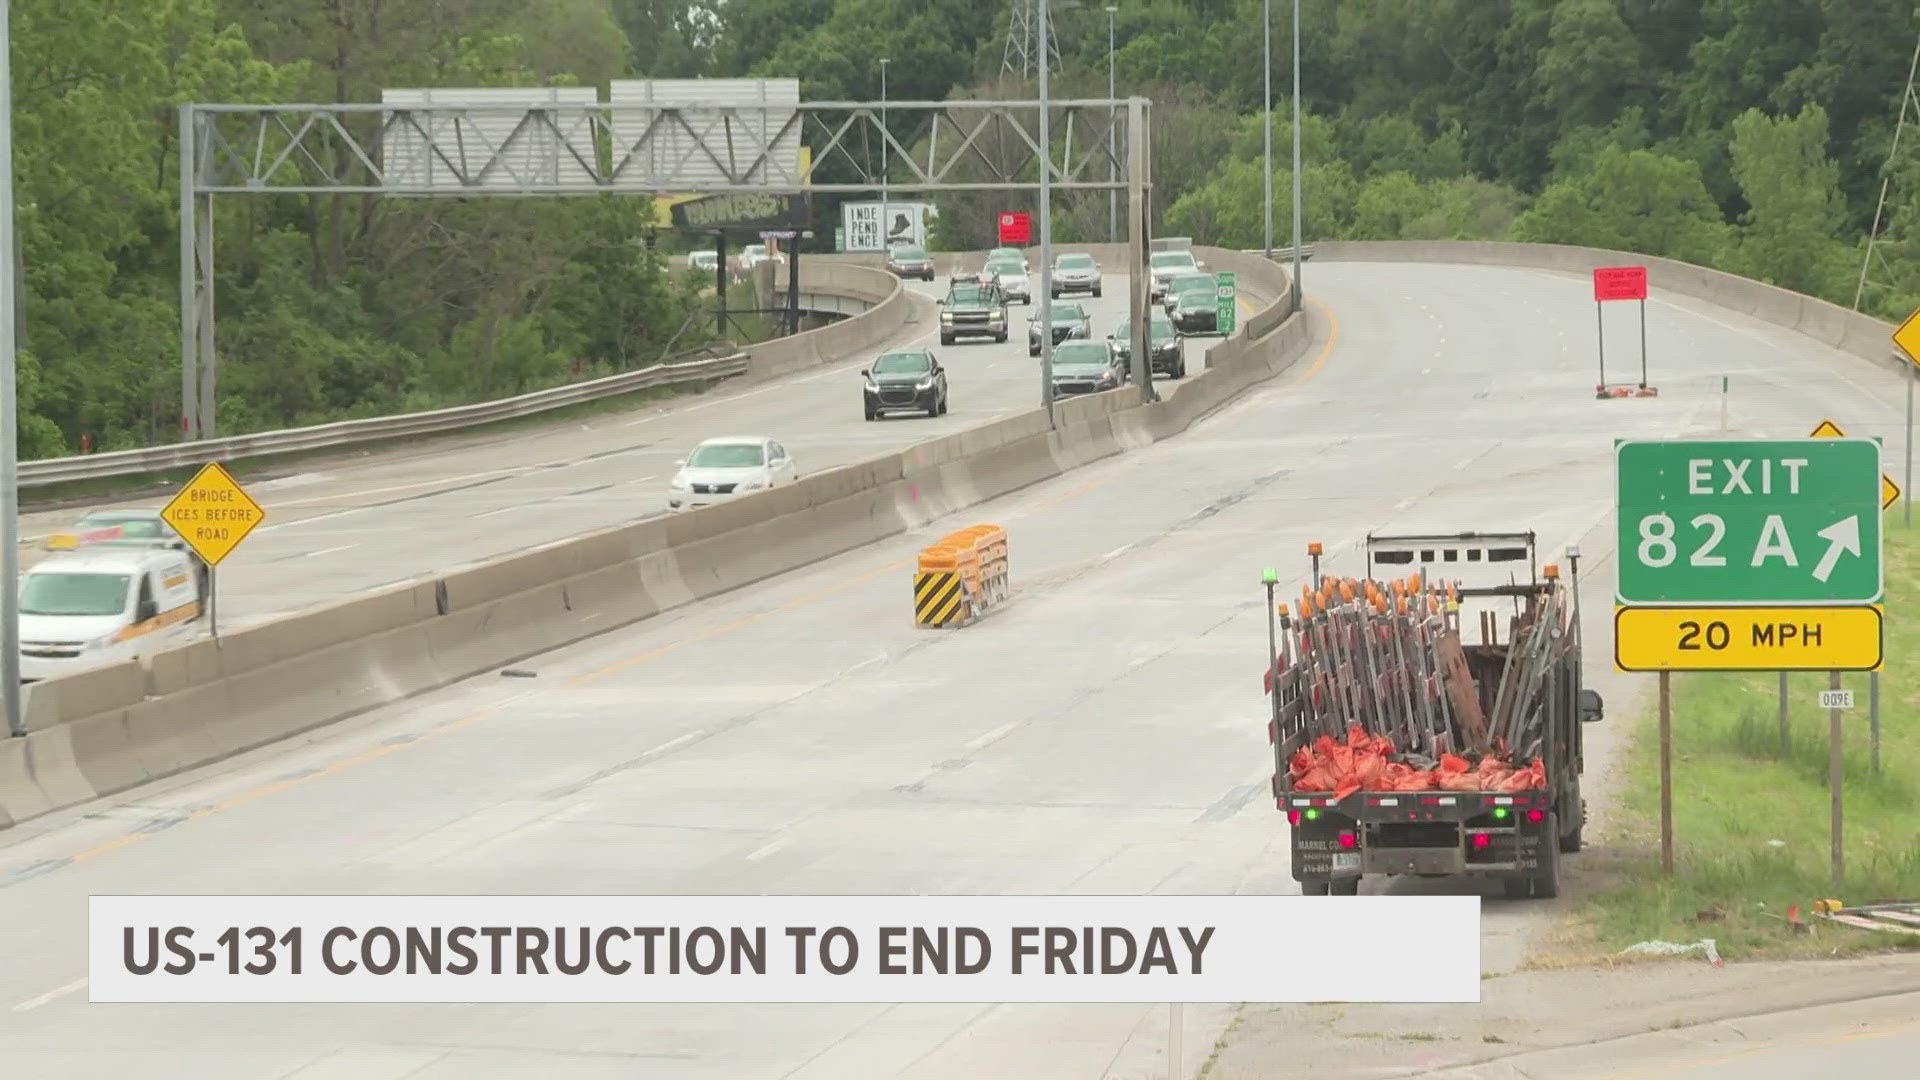 Crews will have close detours to main routes to remove equipment and traffic control in order to fully open US-131 on Friday.